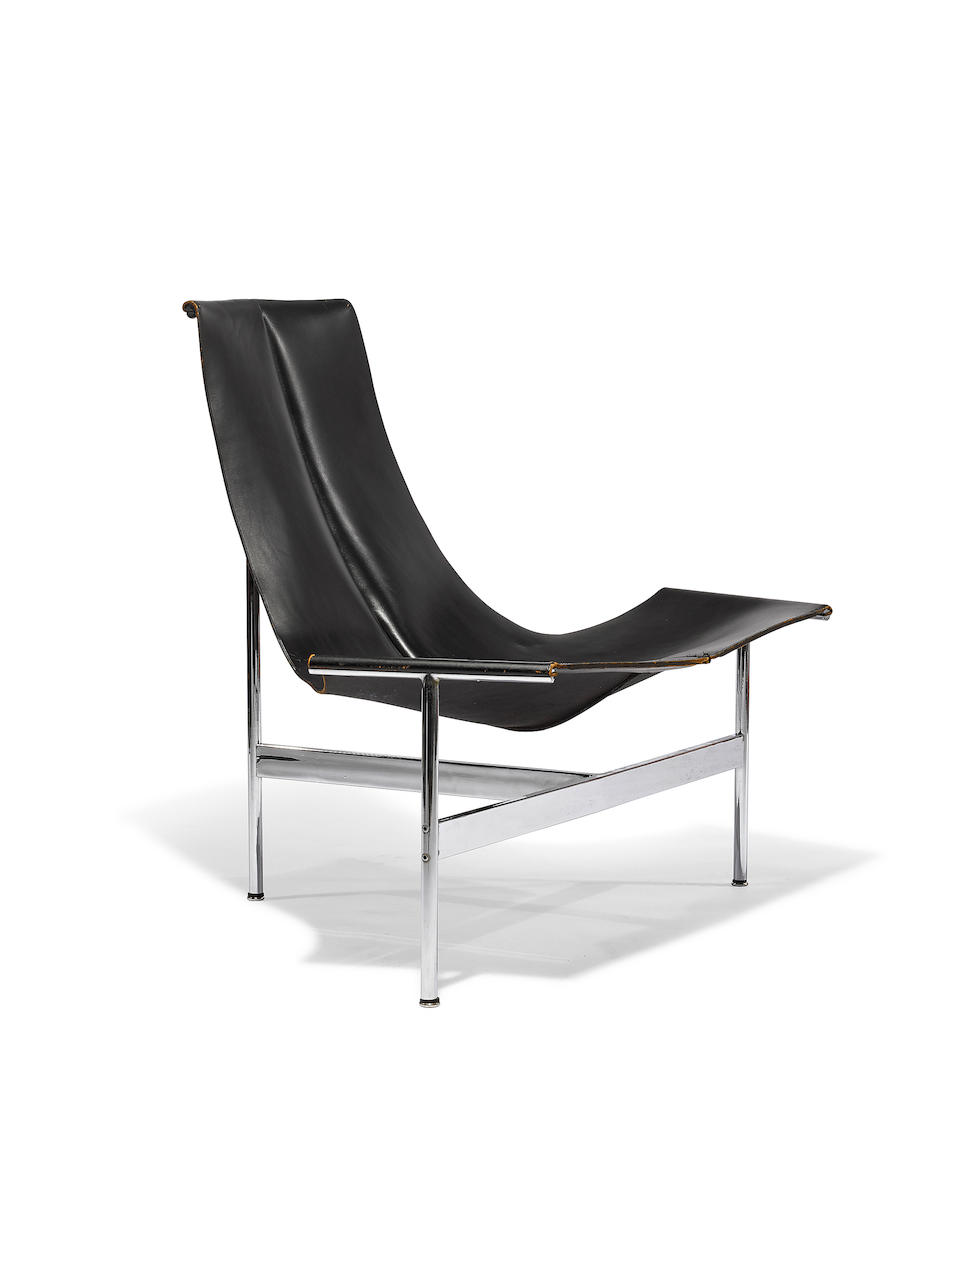 William Katavalos (Born 1924), Ross Littell (1924-2000) & Douglas Kelly (Born 1928) Prototype T Chaircirca 1955for Laverne International, chrome-plated and enameled steel, leatherheight 36 1/8in (91.5cm); width 40 1/8in (102cm); depth 30in (76cm)